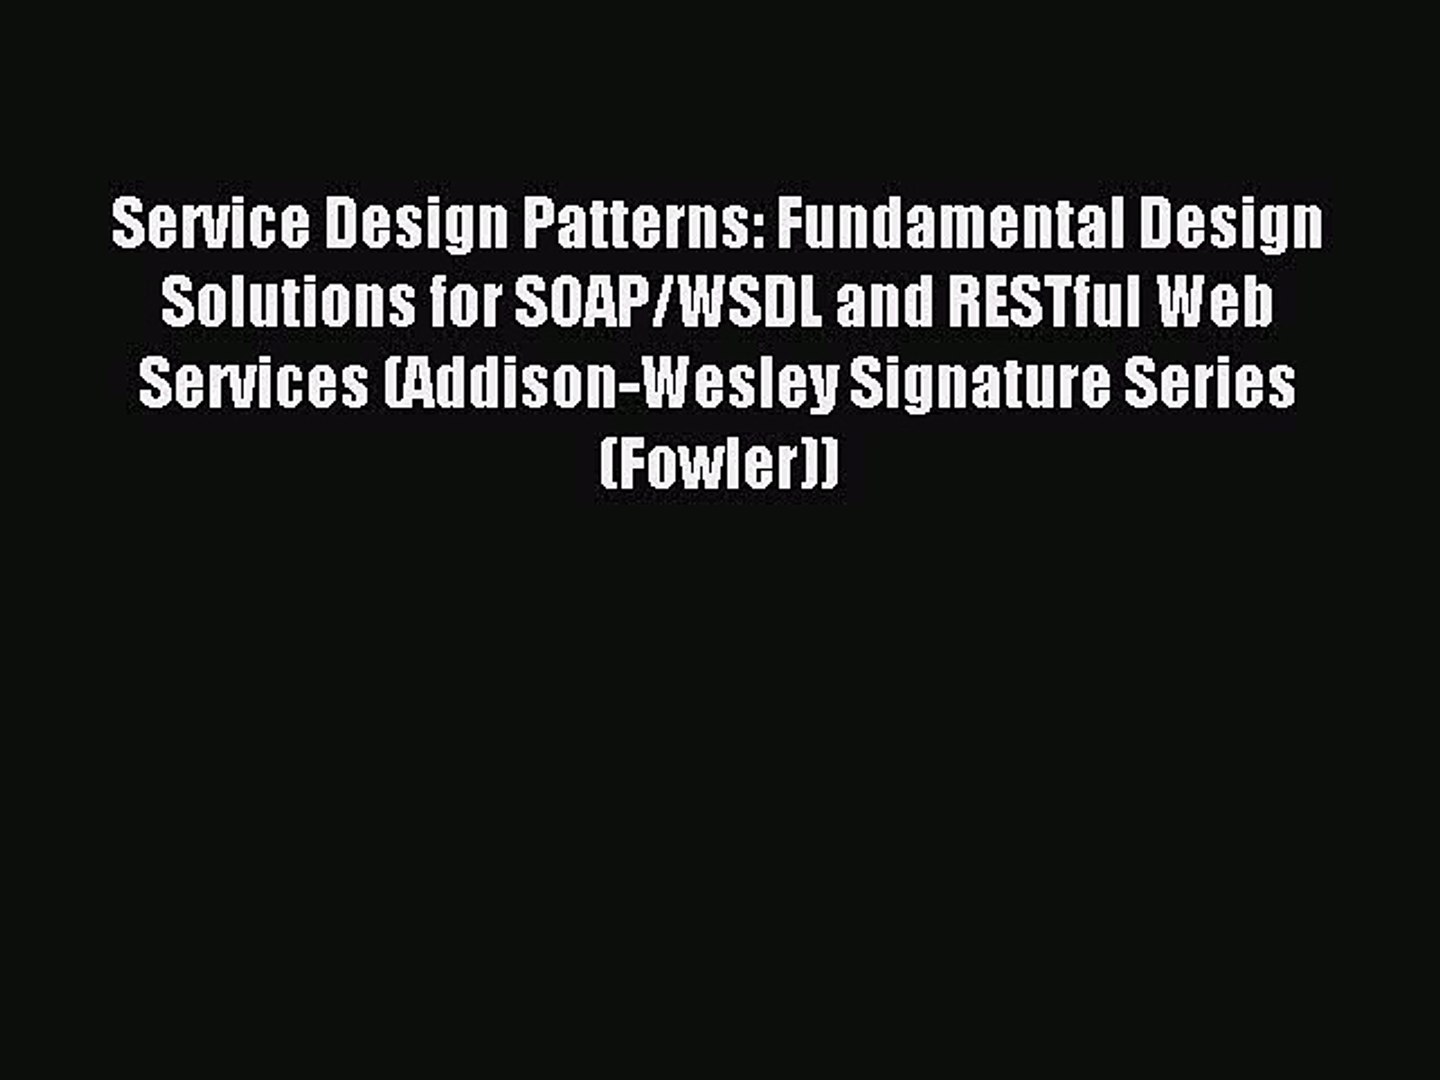 Read Service Design Patterns: Fundamental Design Solutions for SOAP/WSDL and RESTful Web Services